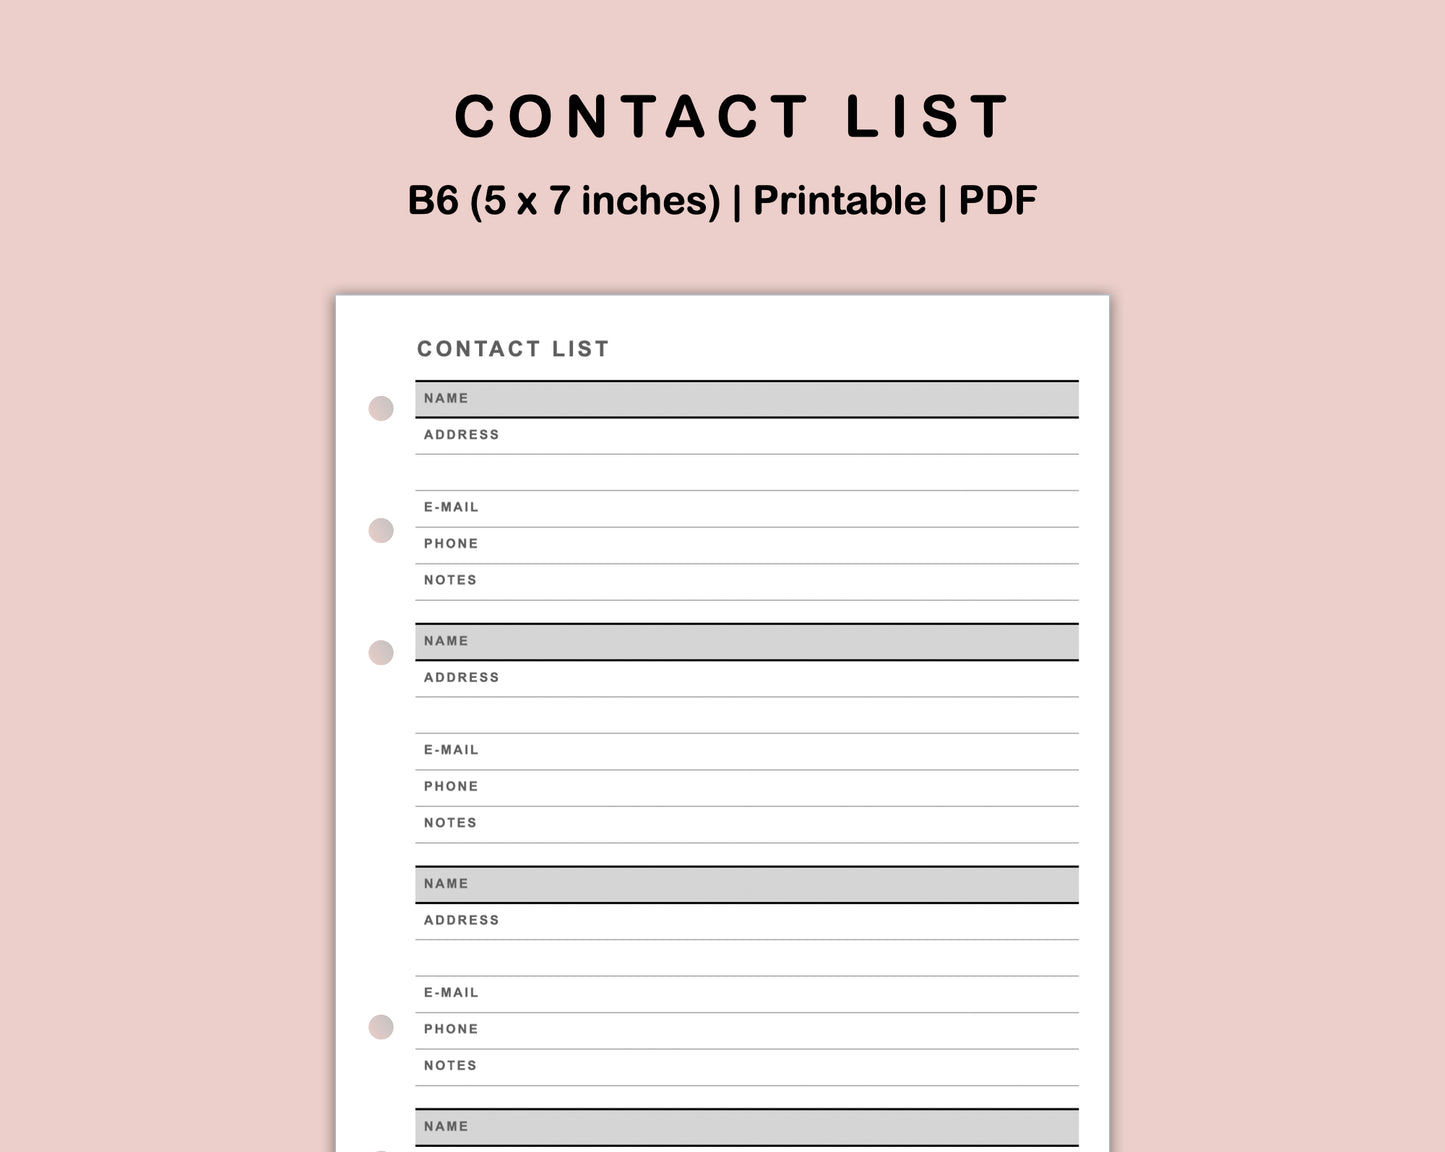 B6 Inserts - Contact List